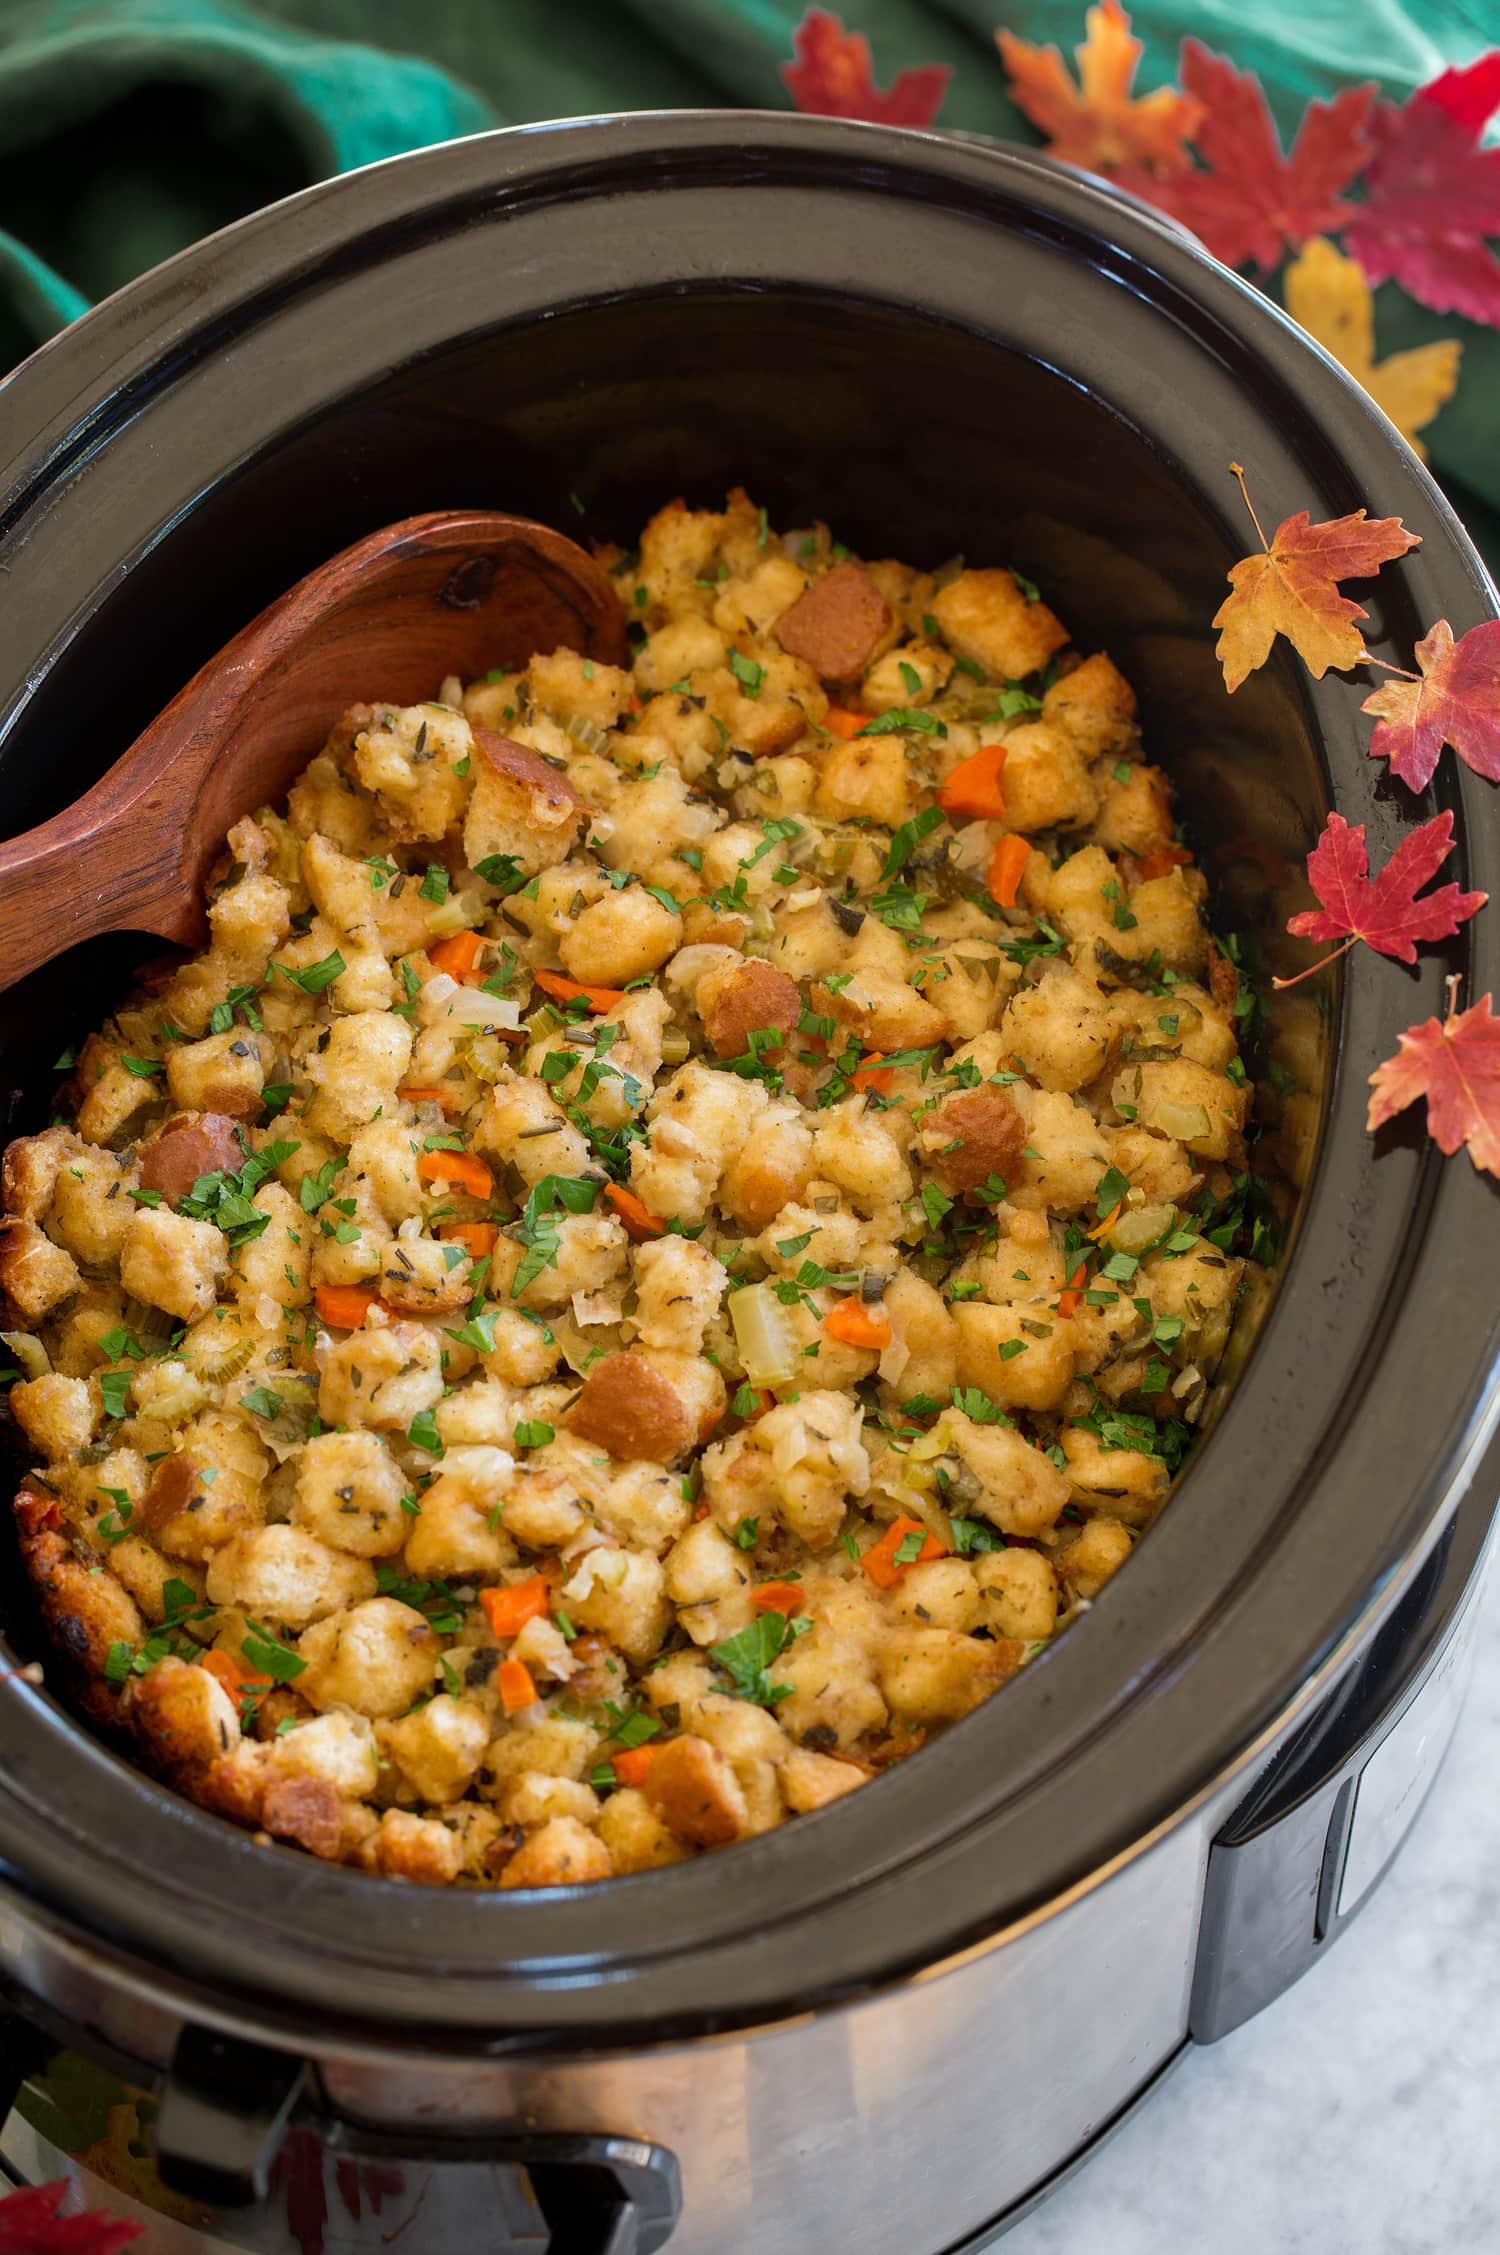 Fill in a slow cooker with decorative autumn leaves and a green cloth on the side.